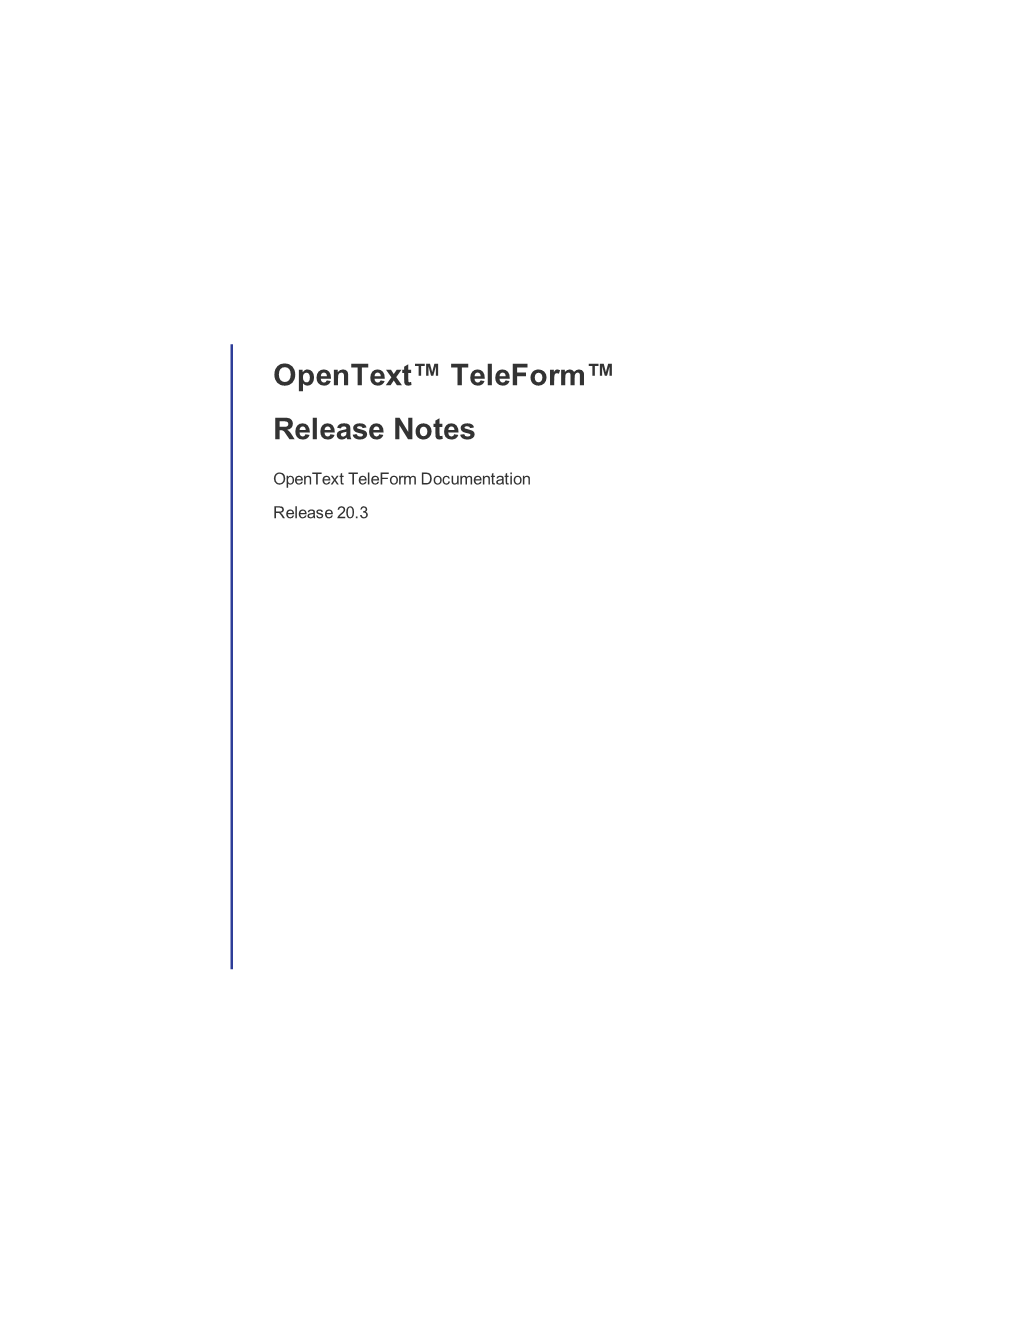 Opentext™ Teleform Release Notes Rev.: June 2020 This Documentation Has Been Created for Software Version 20.3